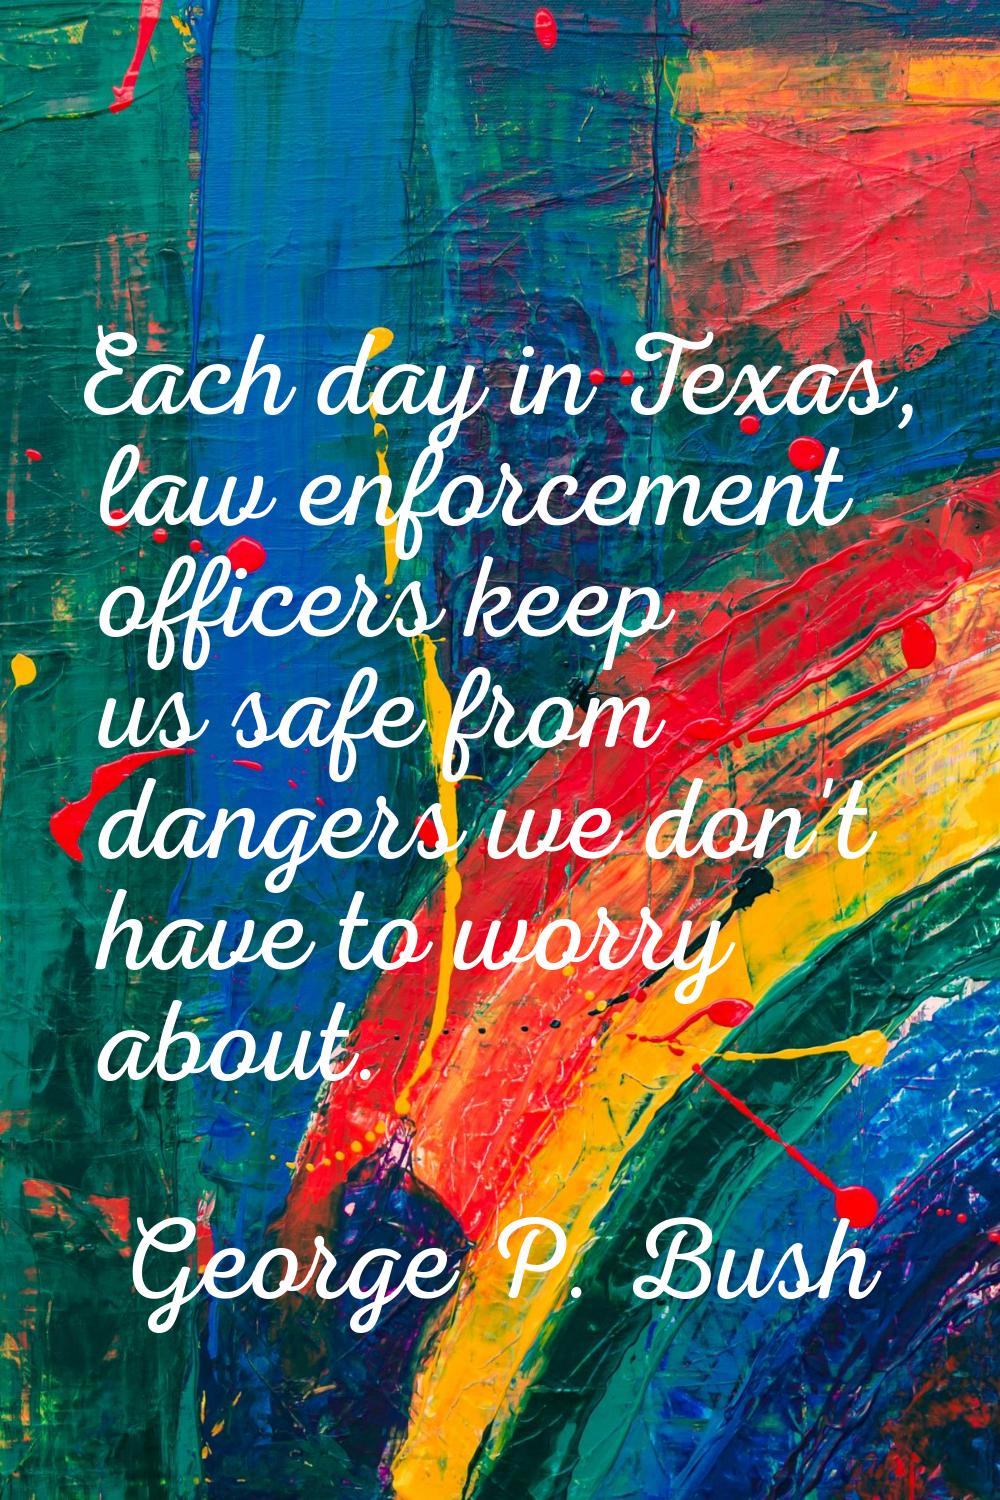 Each day in Texas, law enforcement officers keep us safe from dangers we don't have to worry about.